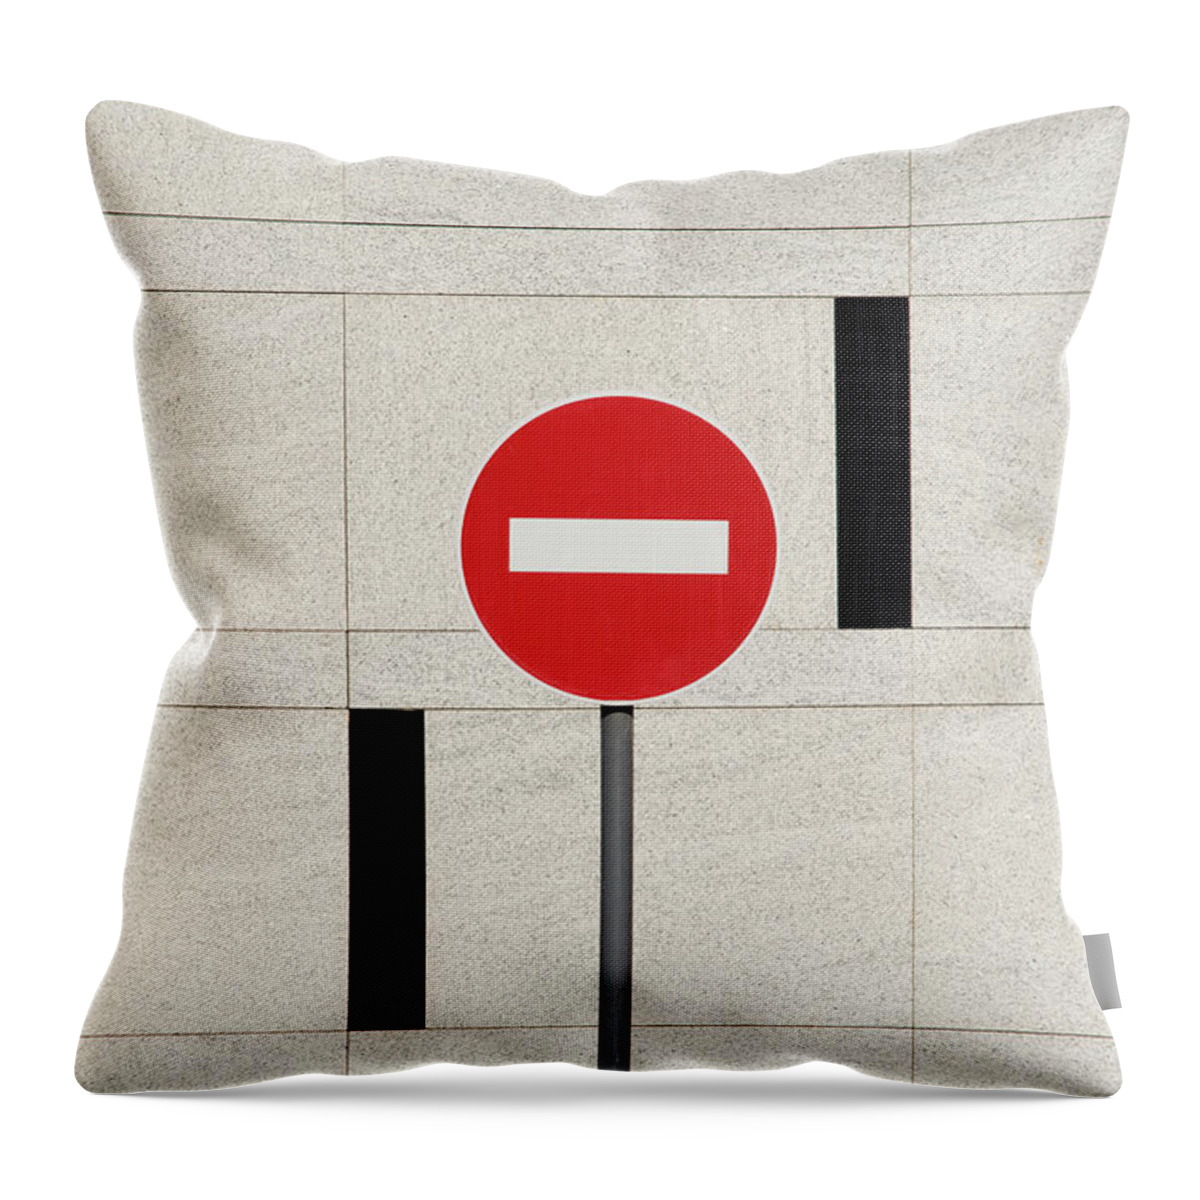 Urban Throw Pillow featuring the photograph No Entry by Stuart Allen